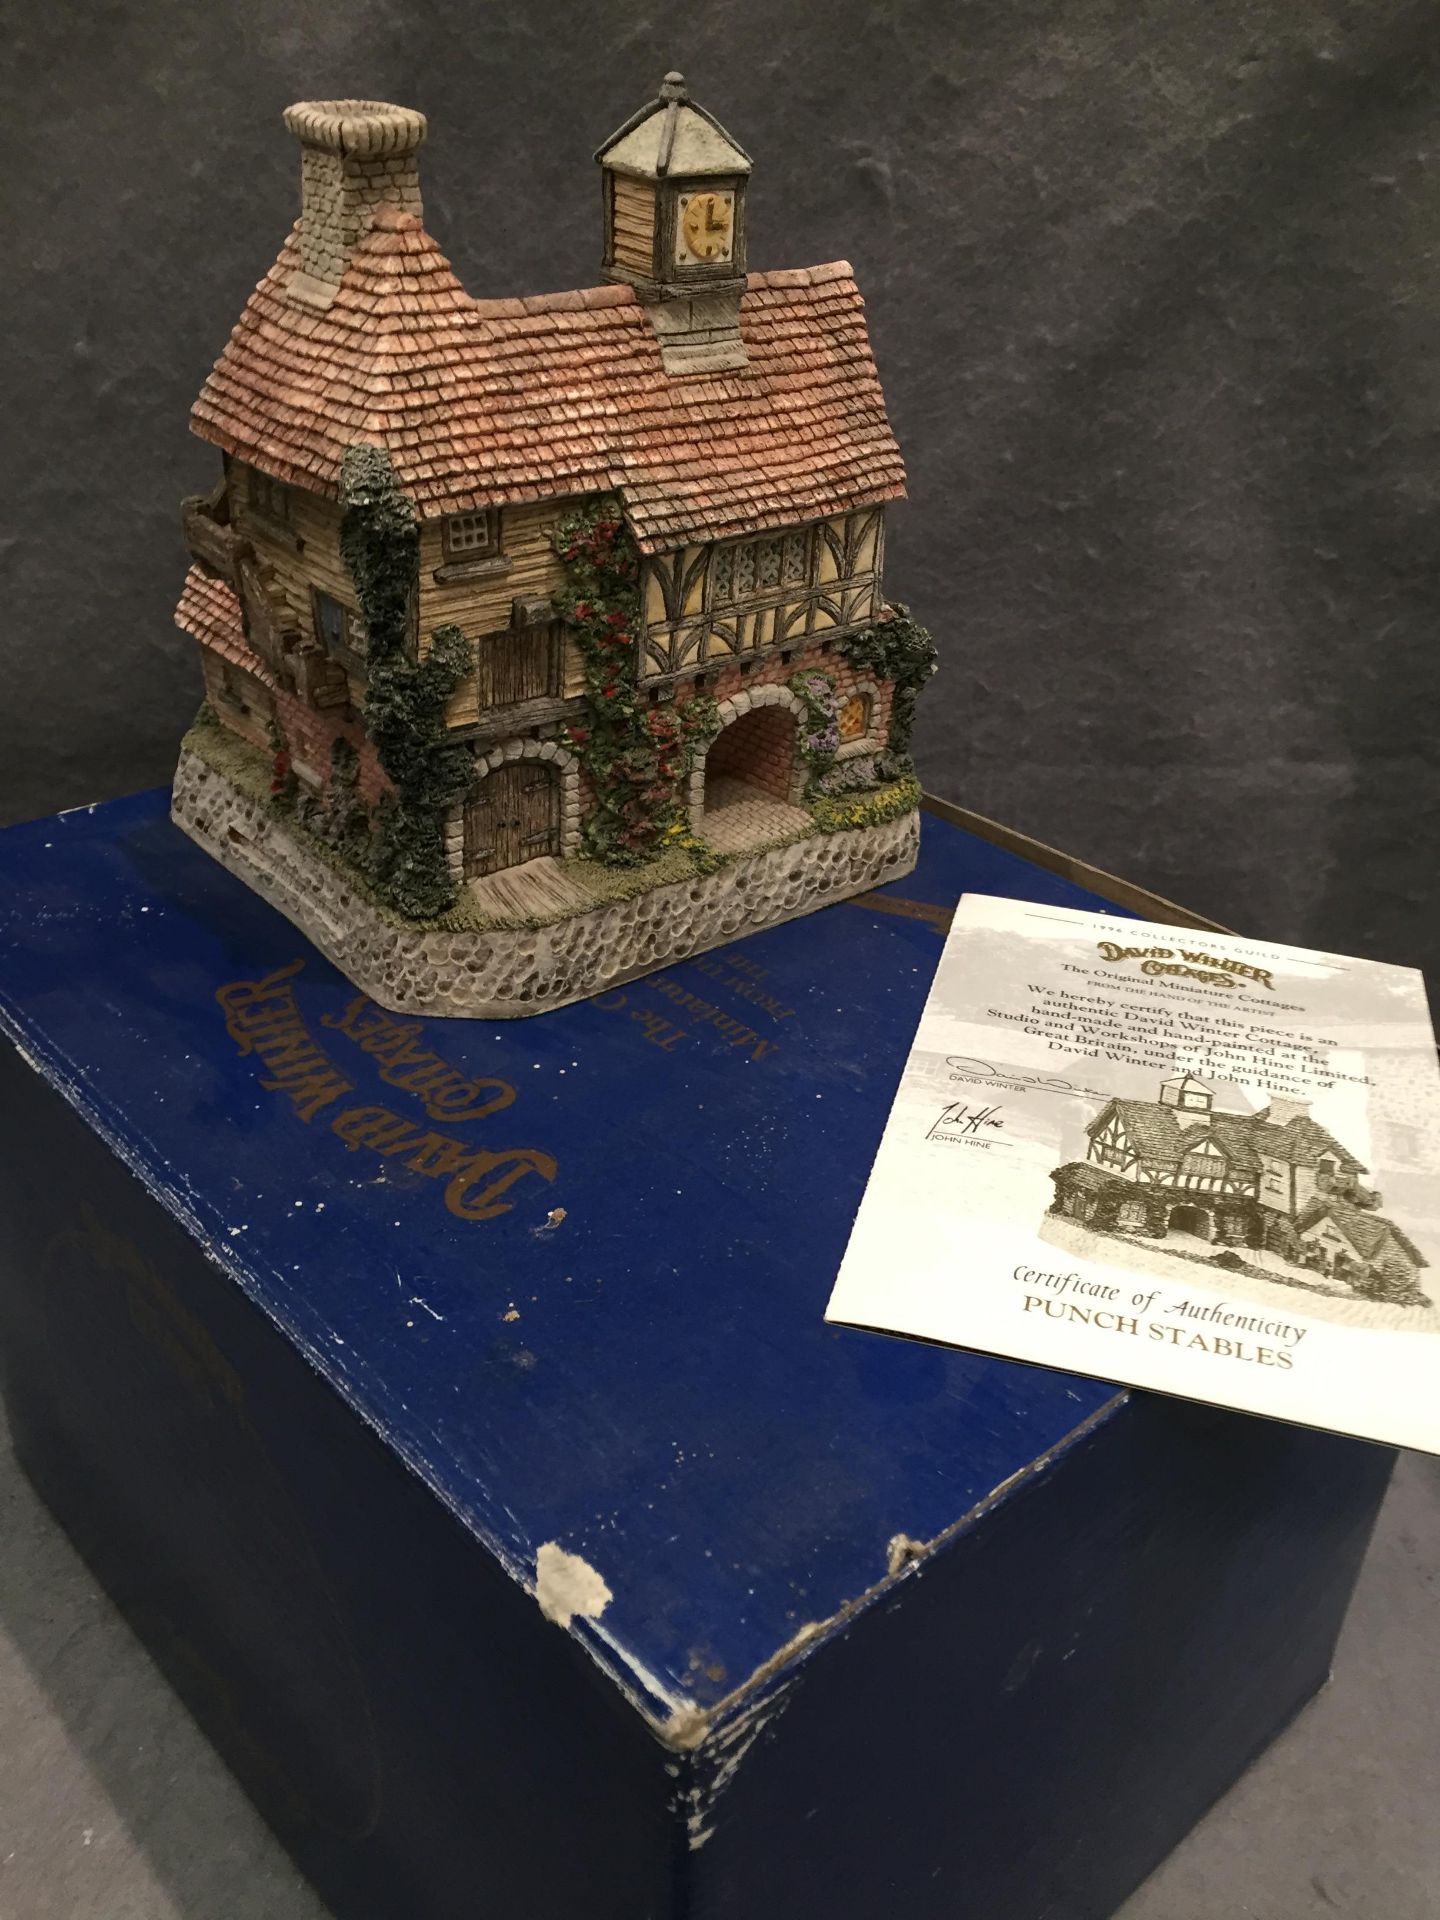 Punch Stables by David Winter height approx 160mm with box & certificate - Image 2 of 2